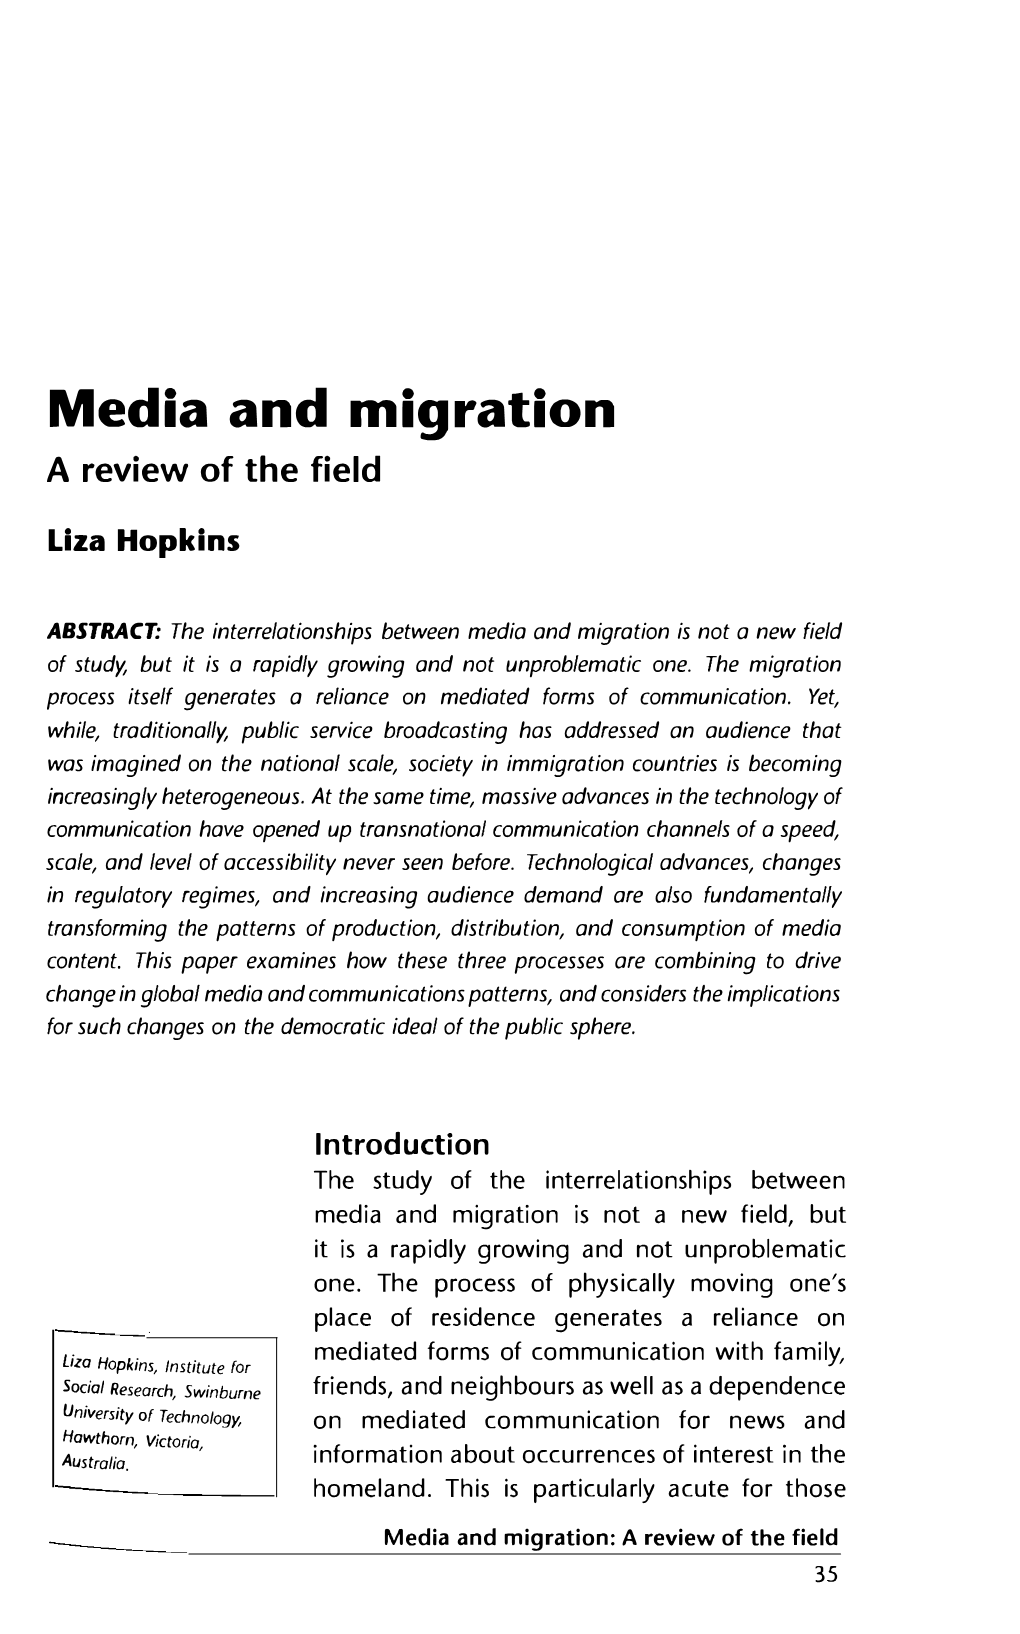 Media and Migration a Review of the Field